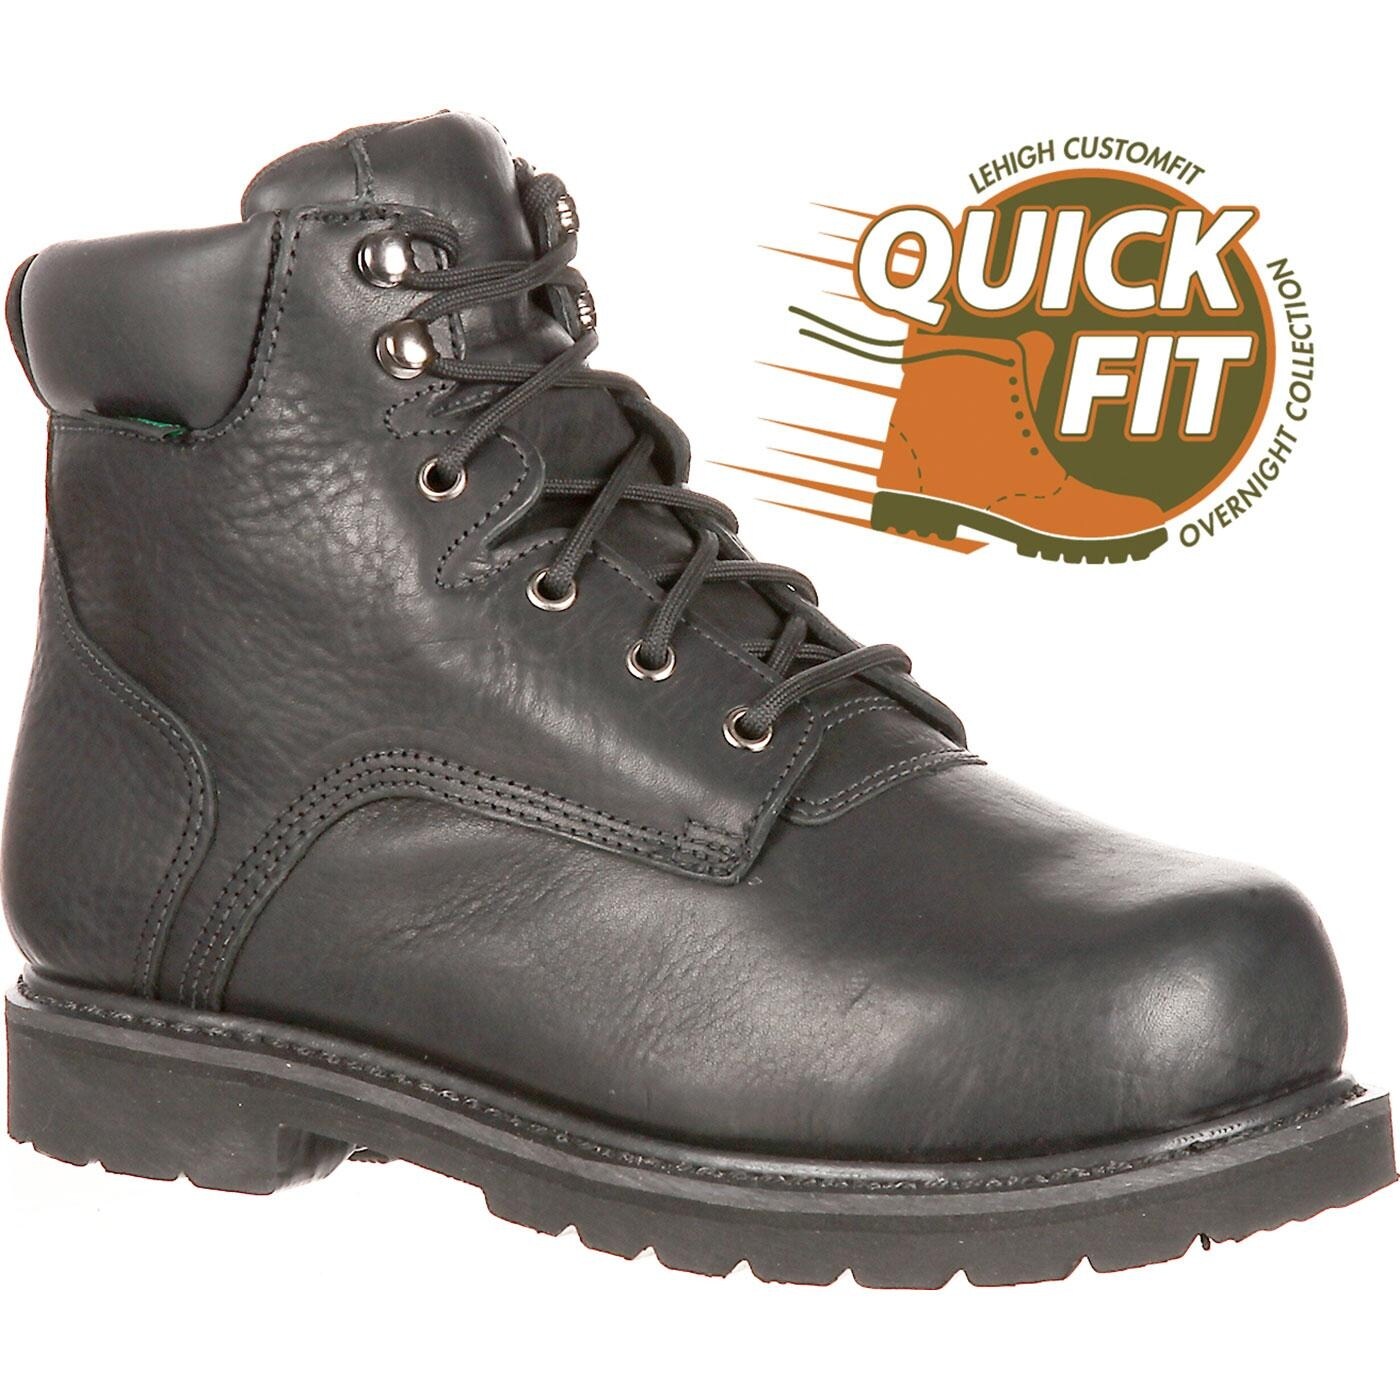 Lehigh QUICKFIT Collection Safety Shoes 